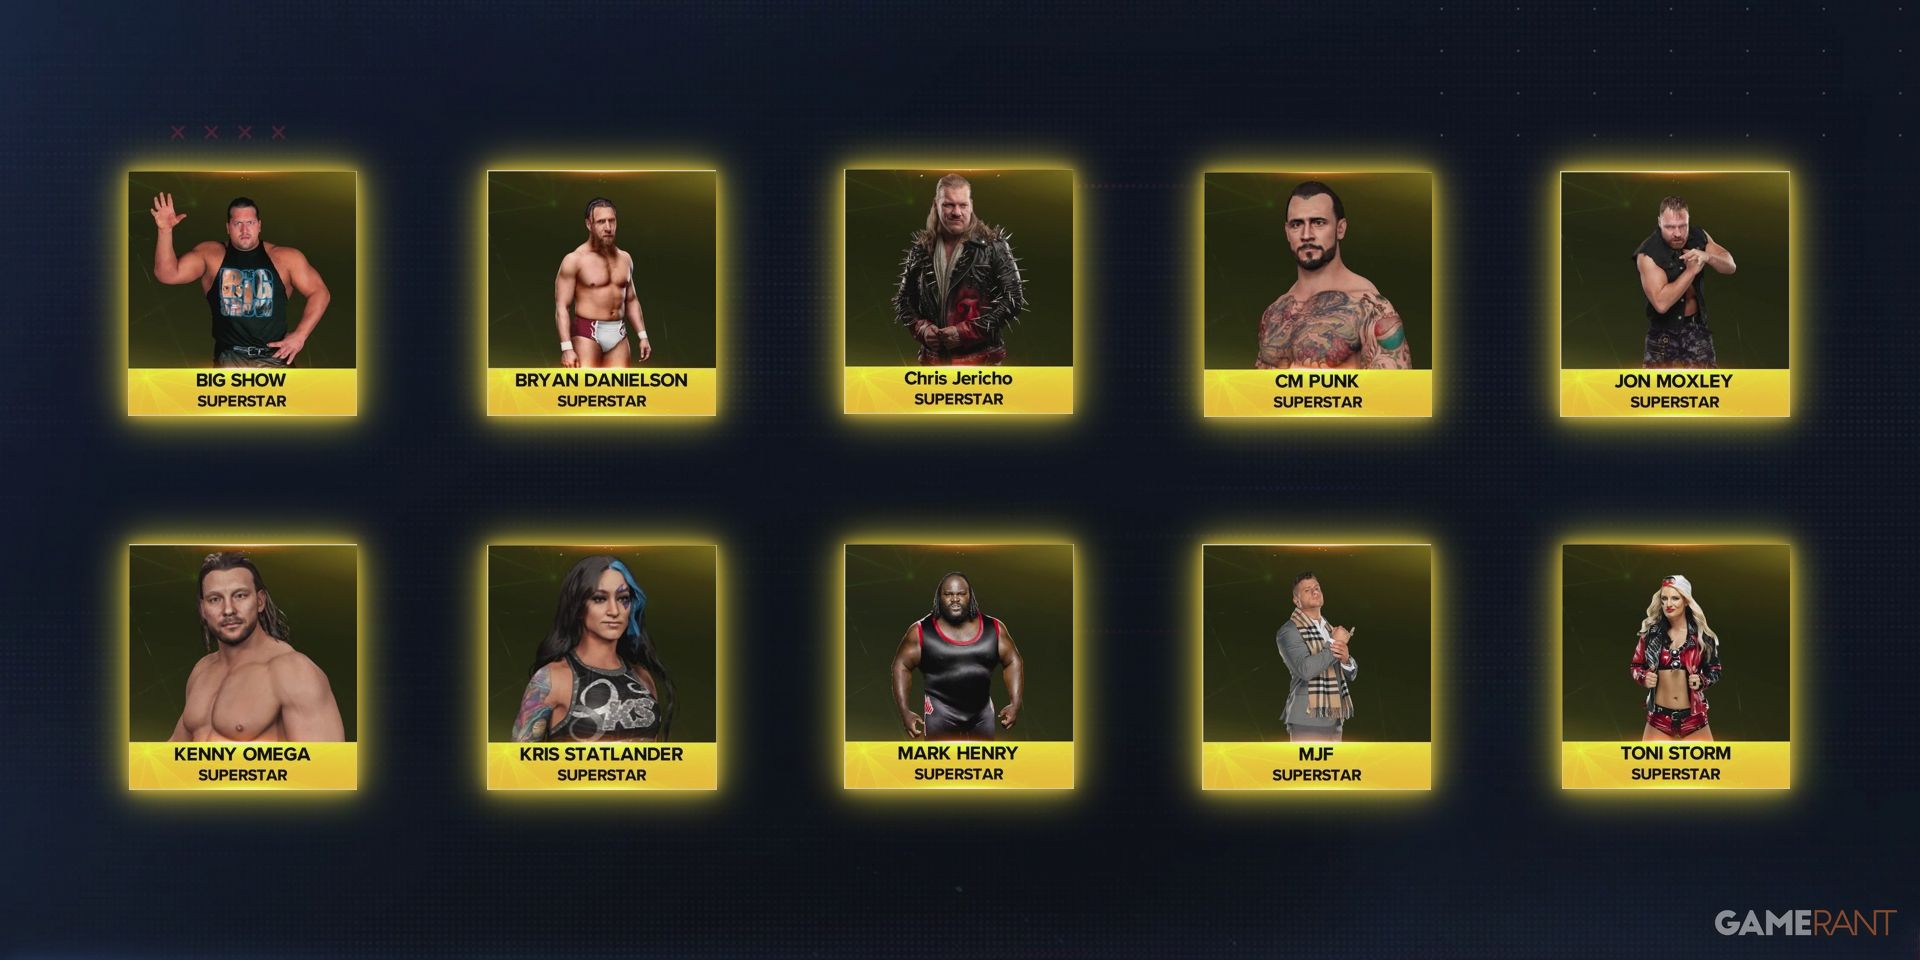 WWE 2K22: How To Download Community Creations (AEW Wrestlers)